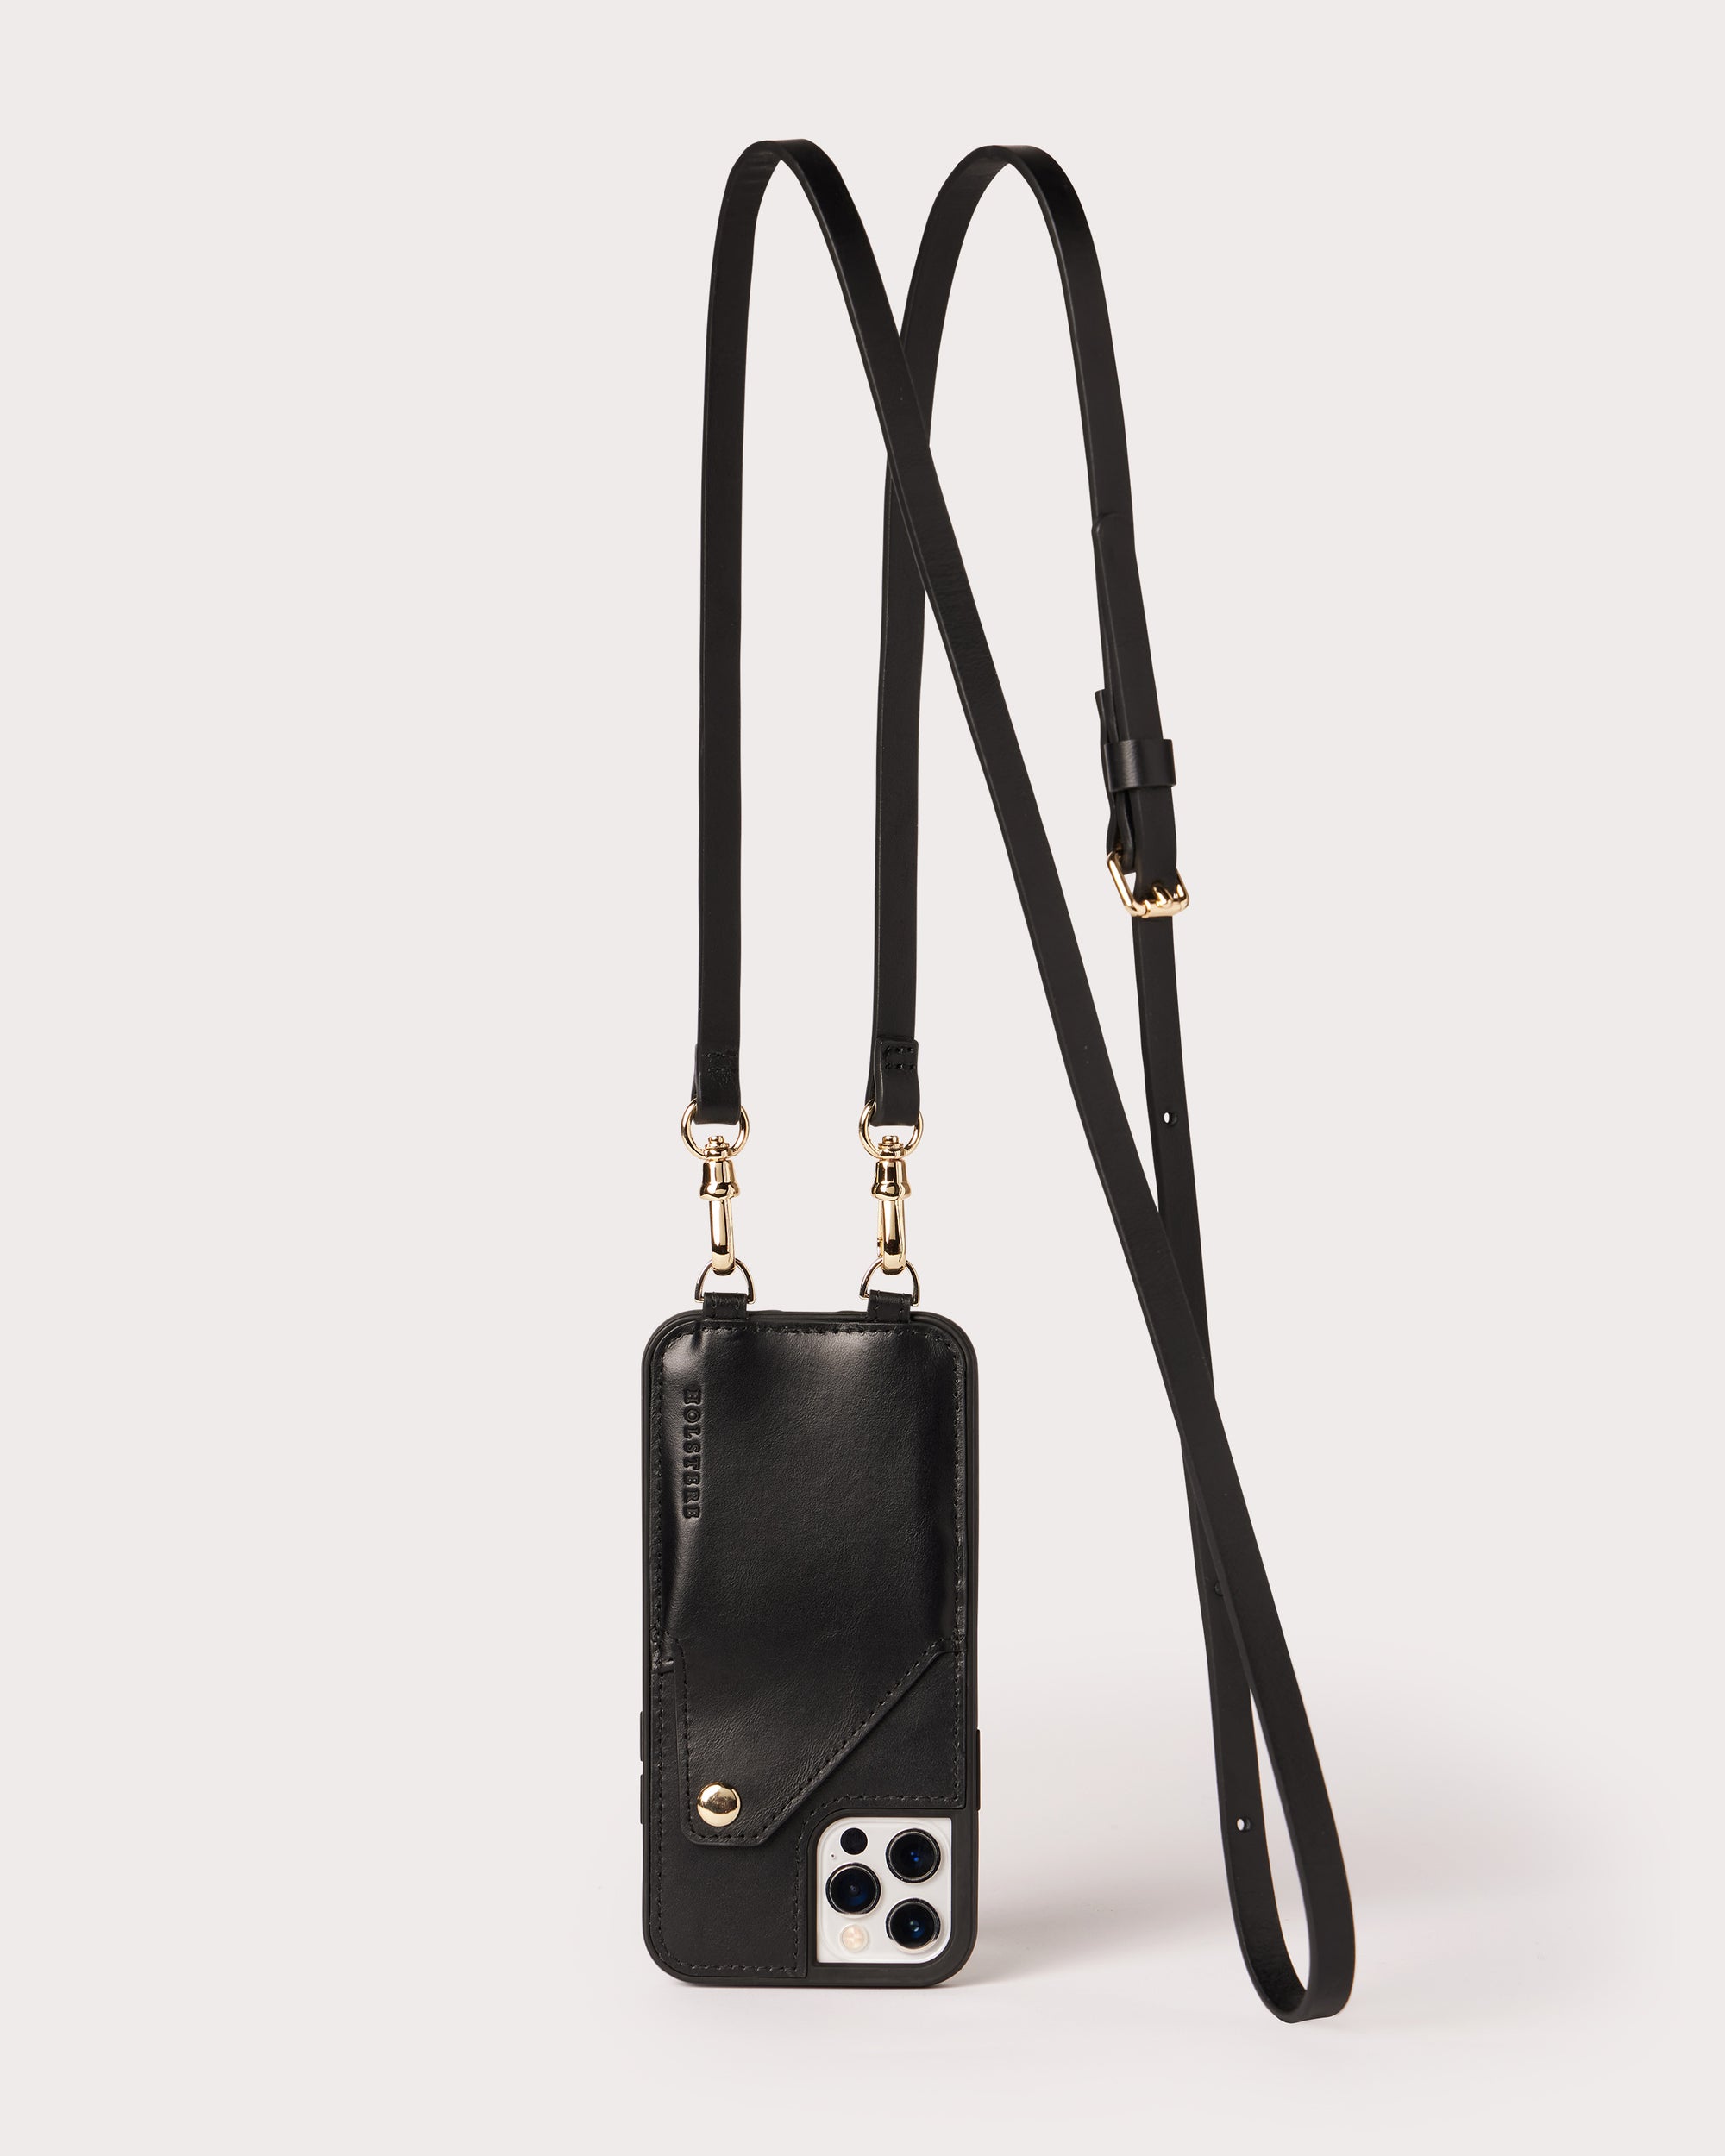 Replacement / Extra Strap for The London Black - Genuine Leather Adjustable Strap with Gold Hardware